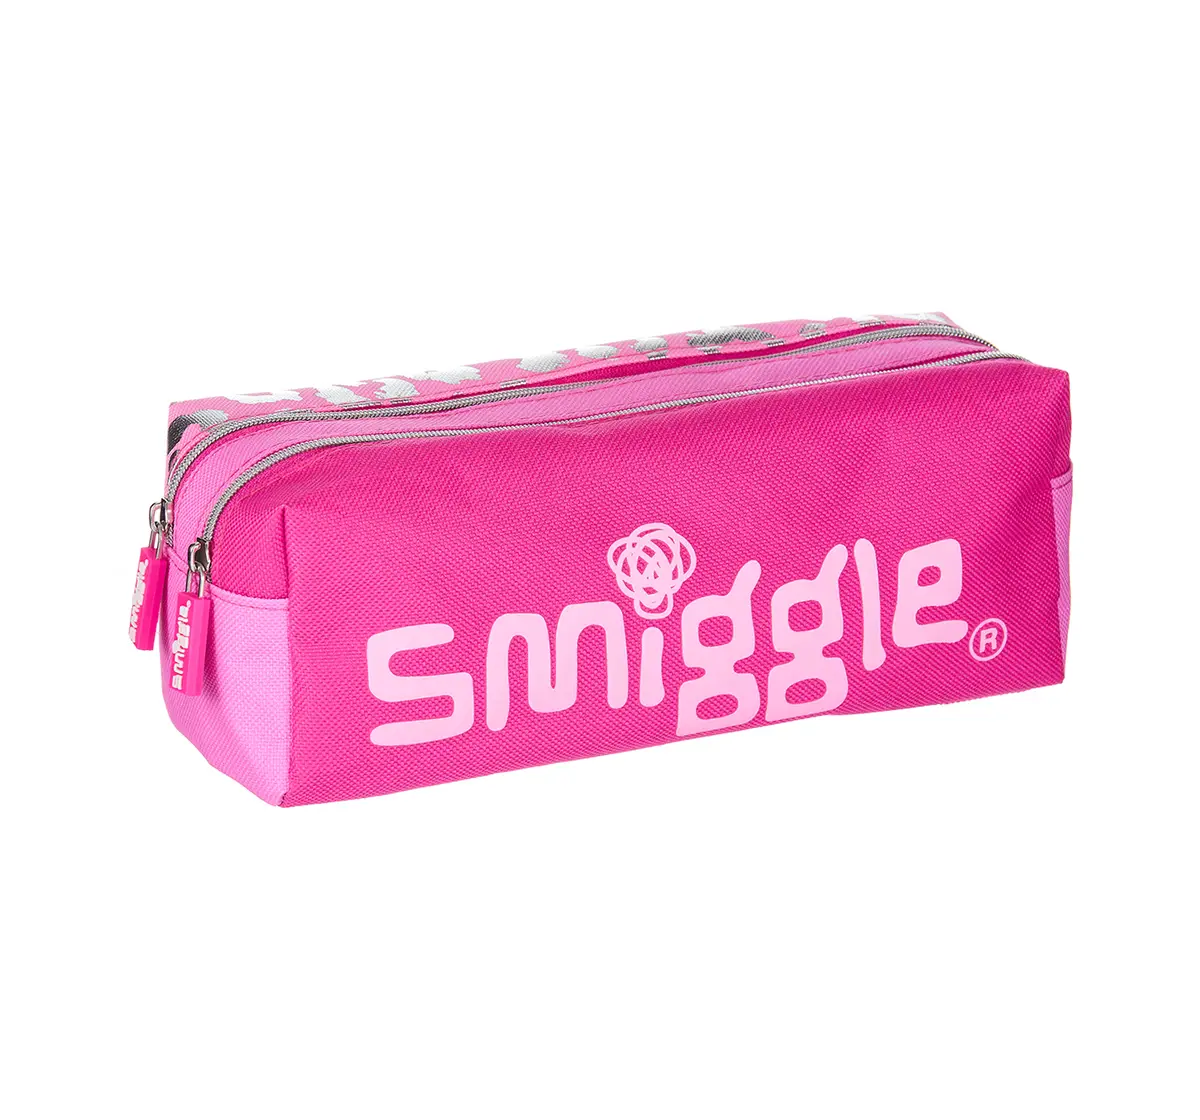 Smiggle Block Pencil Case with Two Zipped Compartments - Leopard Print Bags for Kids age 3Y+ (Pink)